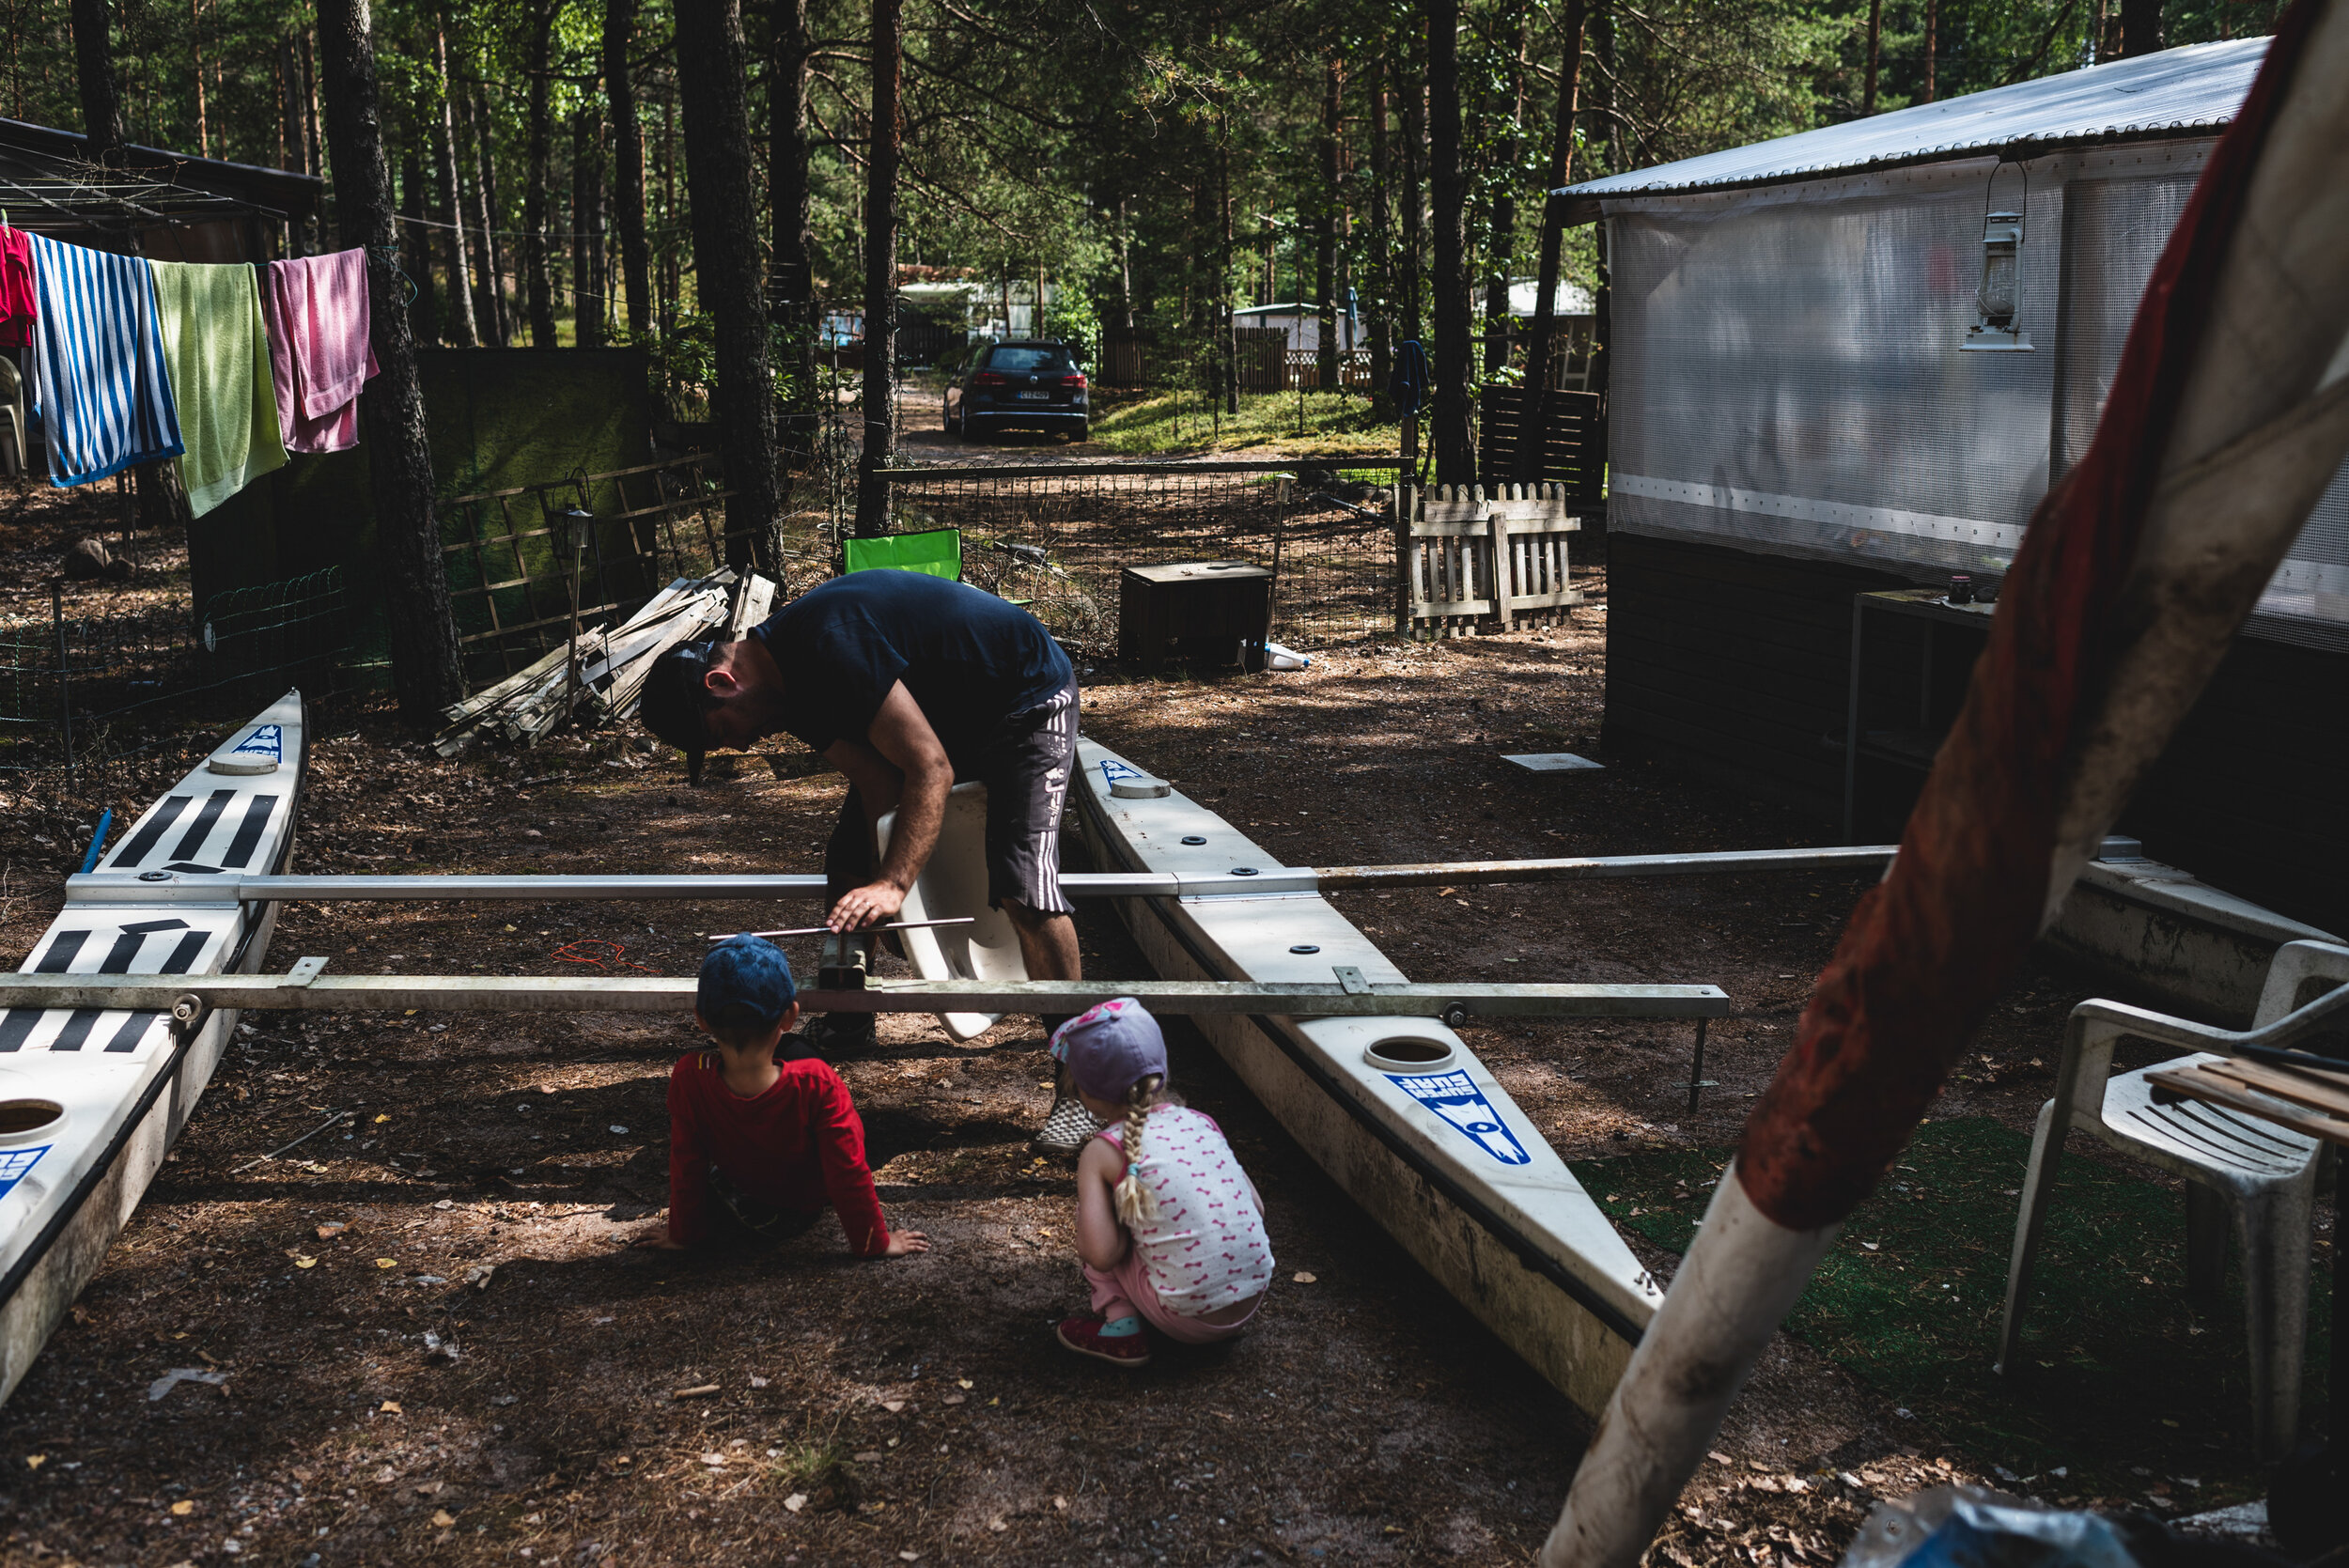  Porvoo, 2019. A Camping site has grown into a hundred years old gravel pit in Sondby, Porvoo. Finnish actor and director Spede Pasasen was also an inventor, who develop a vessel called Super Surf. Family had some trouble assembling the thing. 